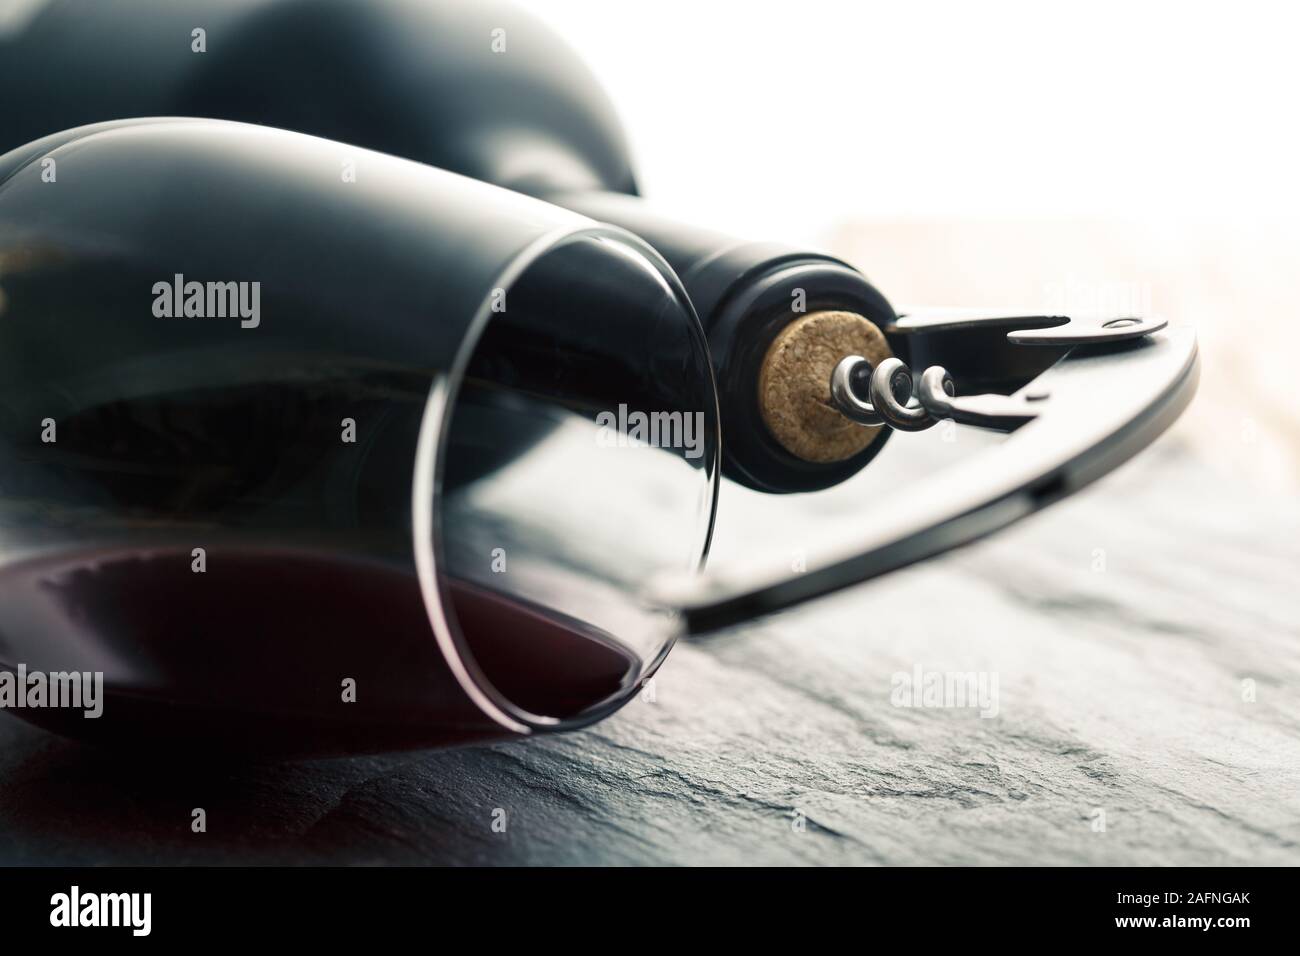 Stainless wine corkscrew in a cork of wine bottle neck and wine glass with wine lying on a black rocky slate background Stock Photo